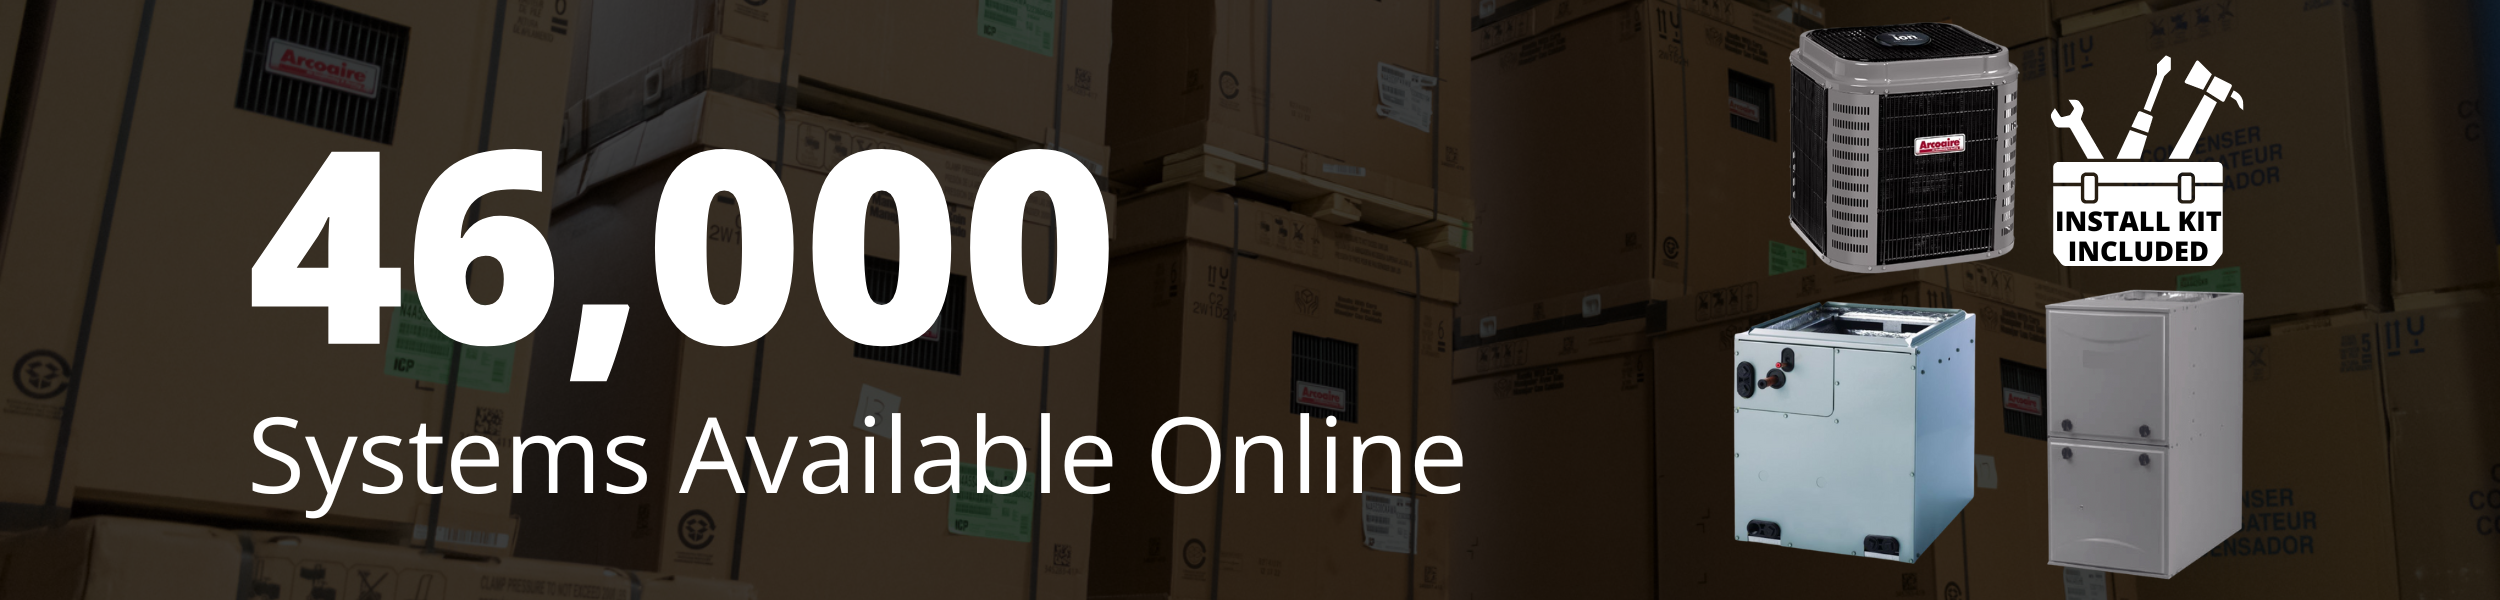 Showcasing United Refrigeration has 46,000 complete systems available online